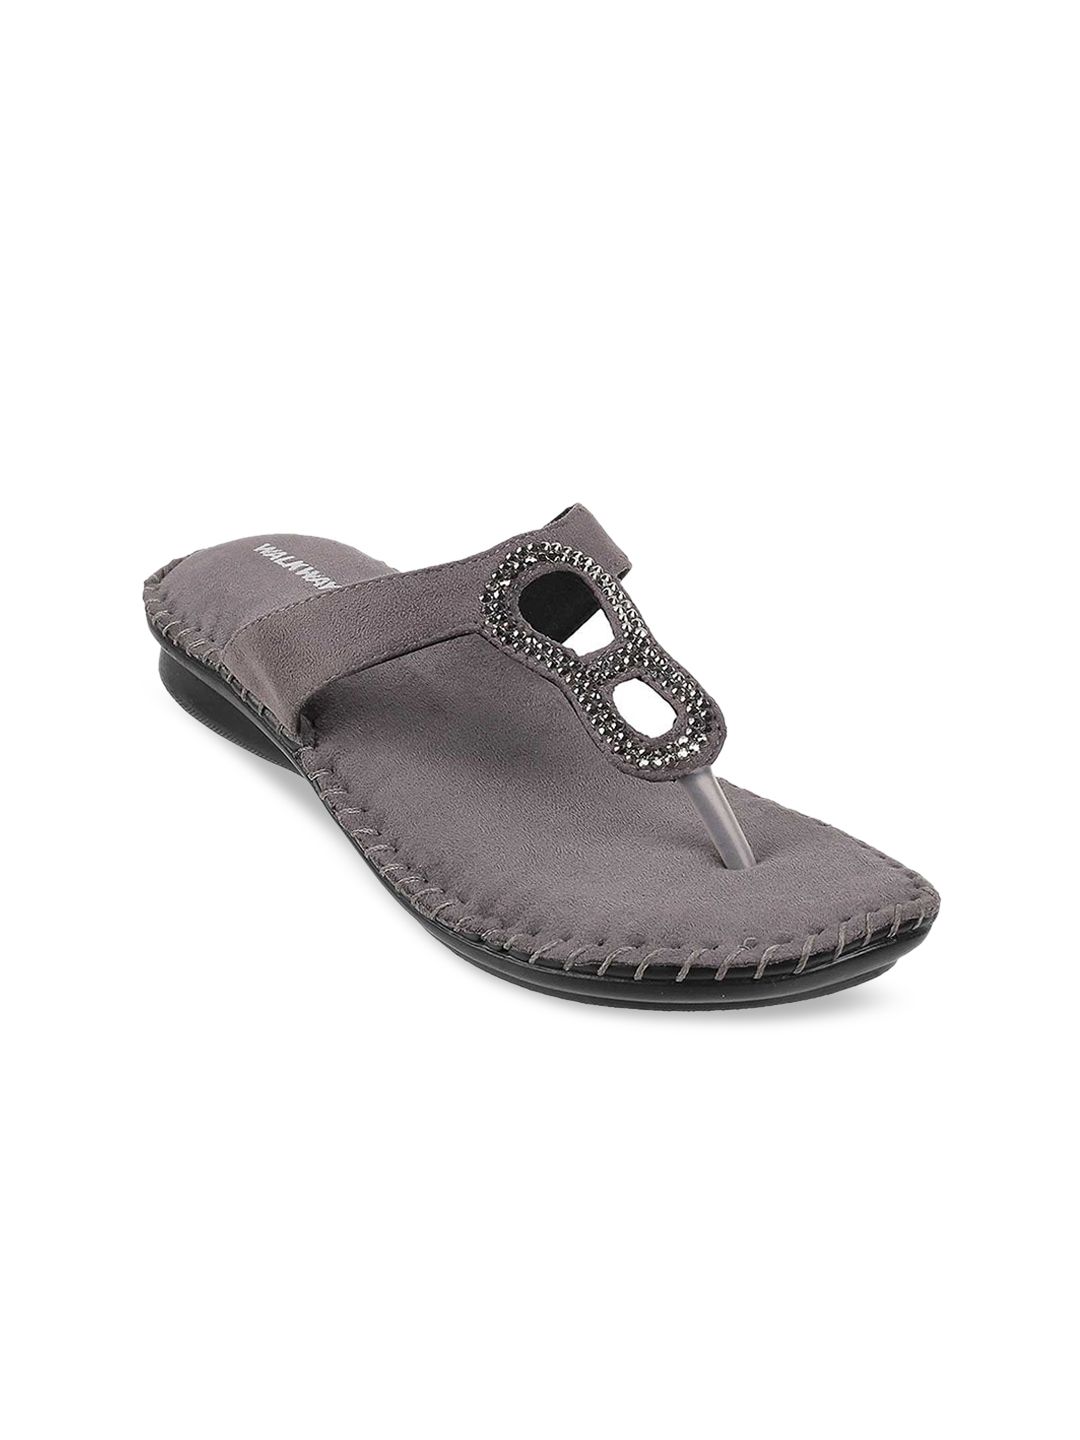 WALKWAY by Metro Women Grey Embellished T-Strap Flats Price in India